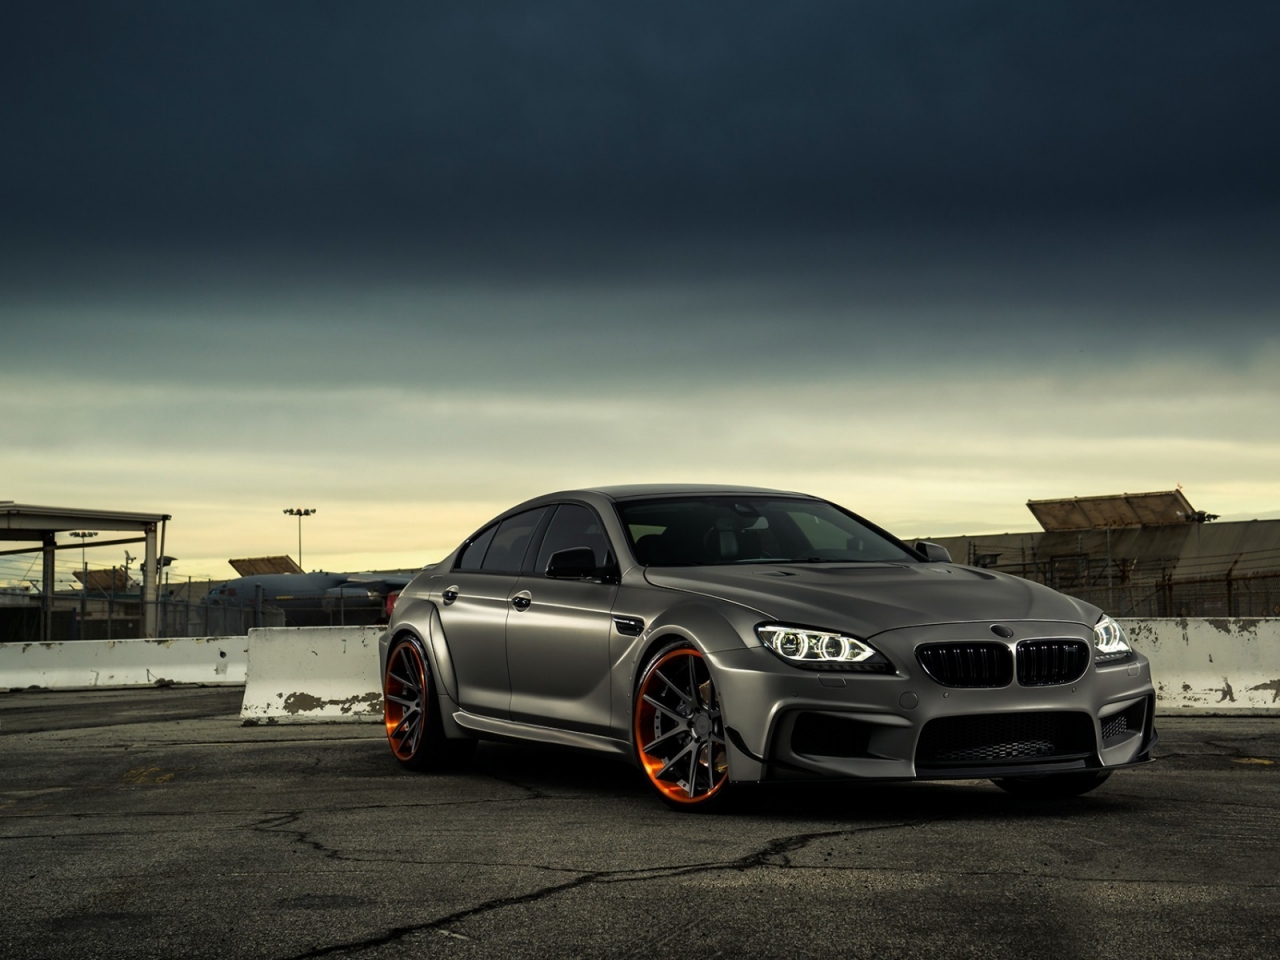 Gorgeous BMW M6 for 1280 x 960 resolution